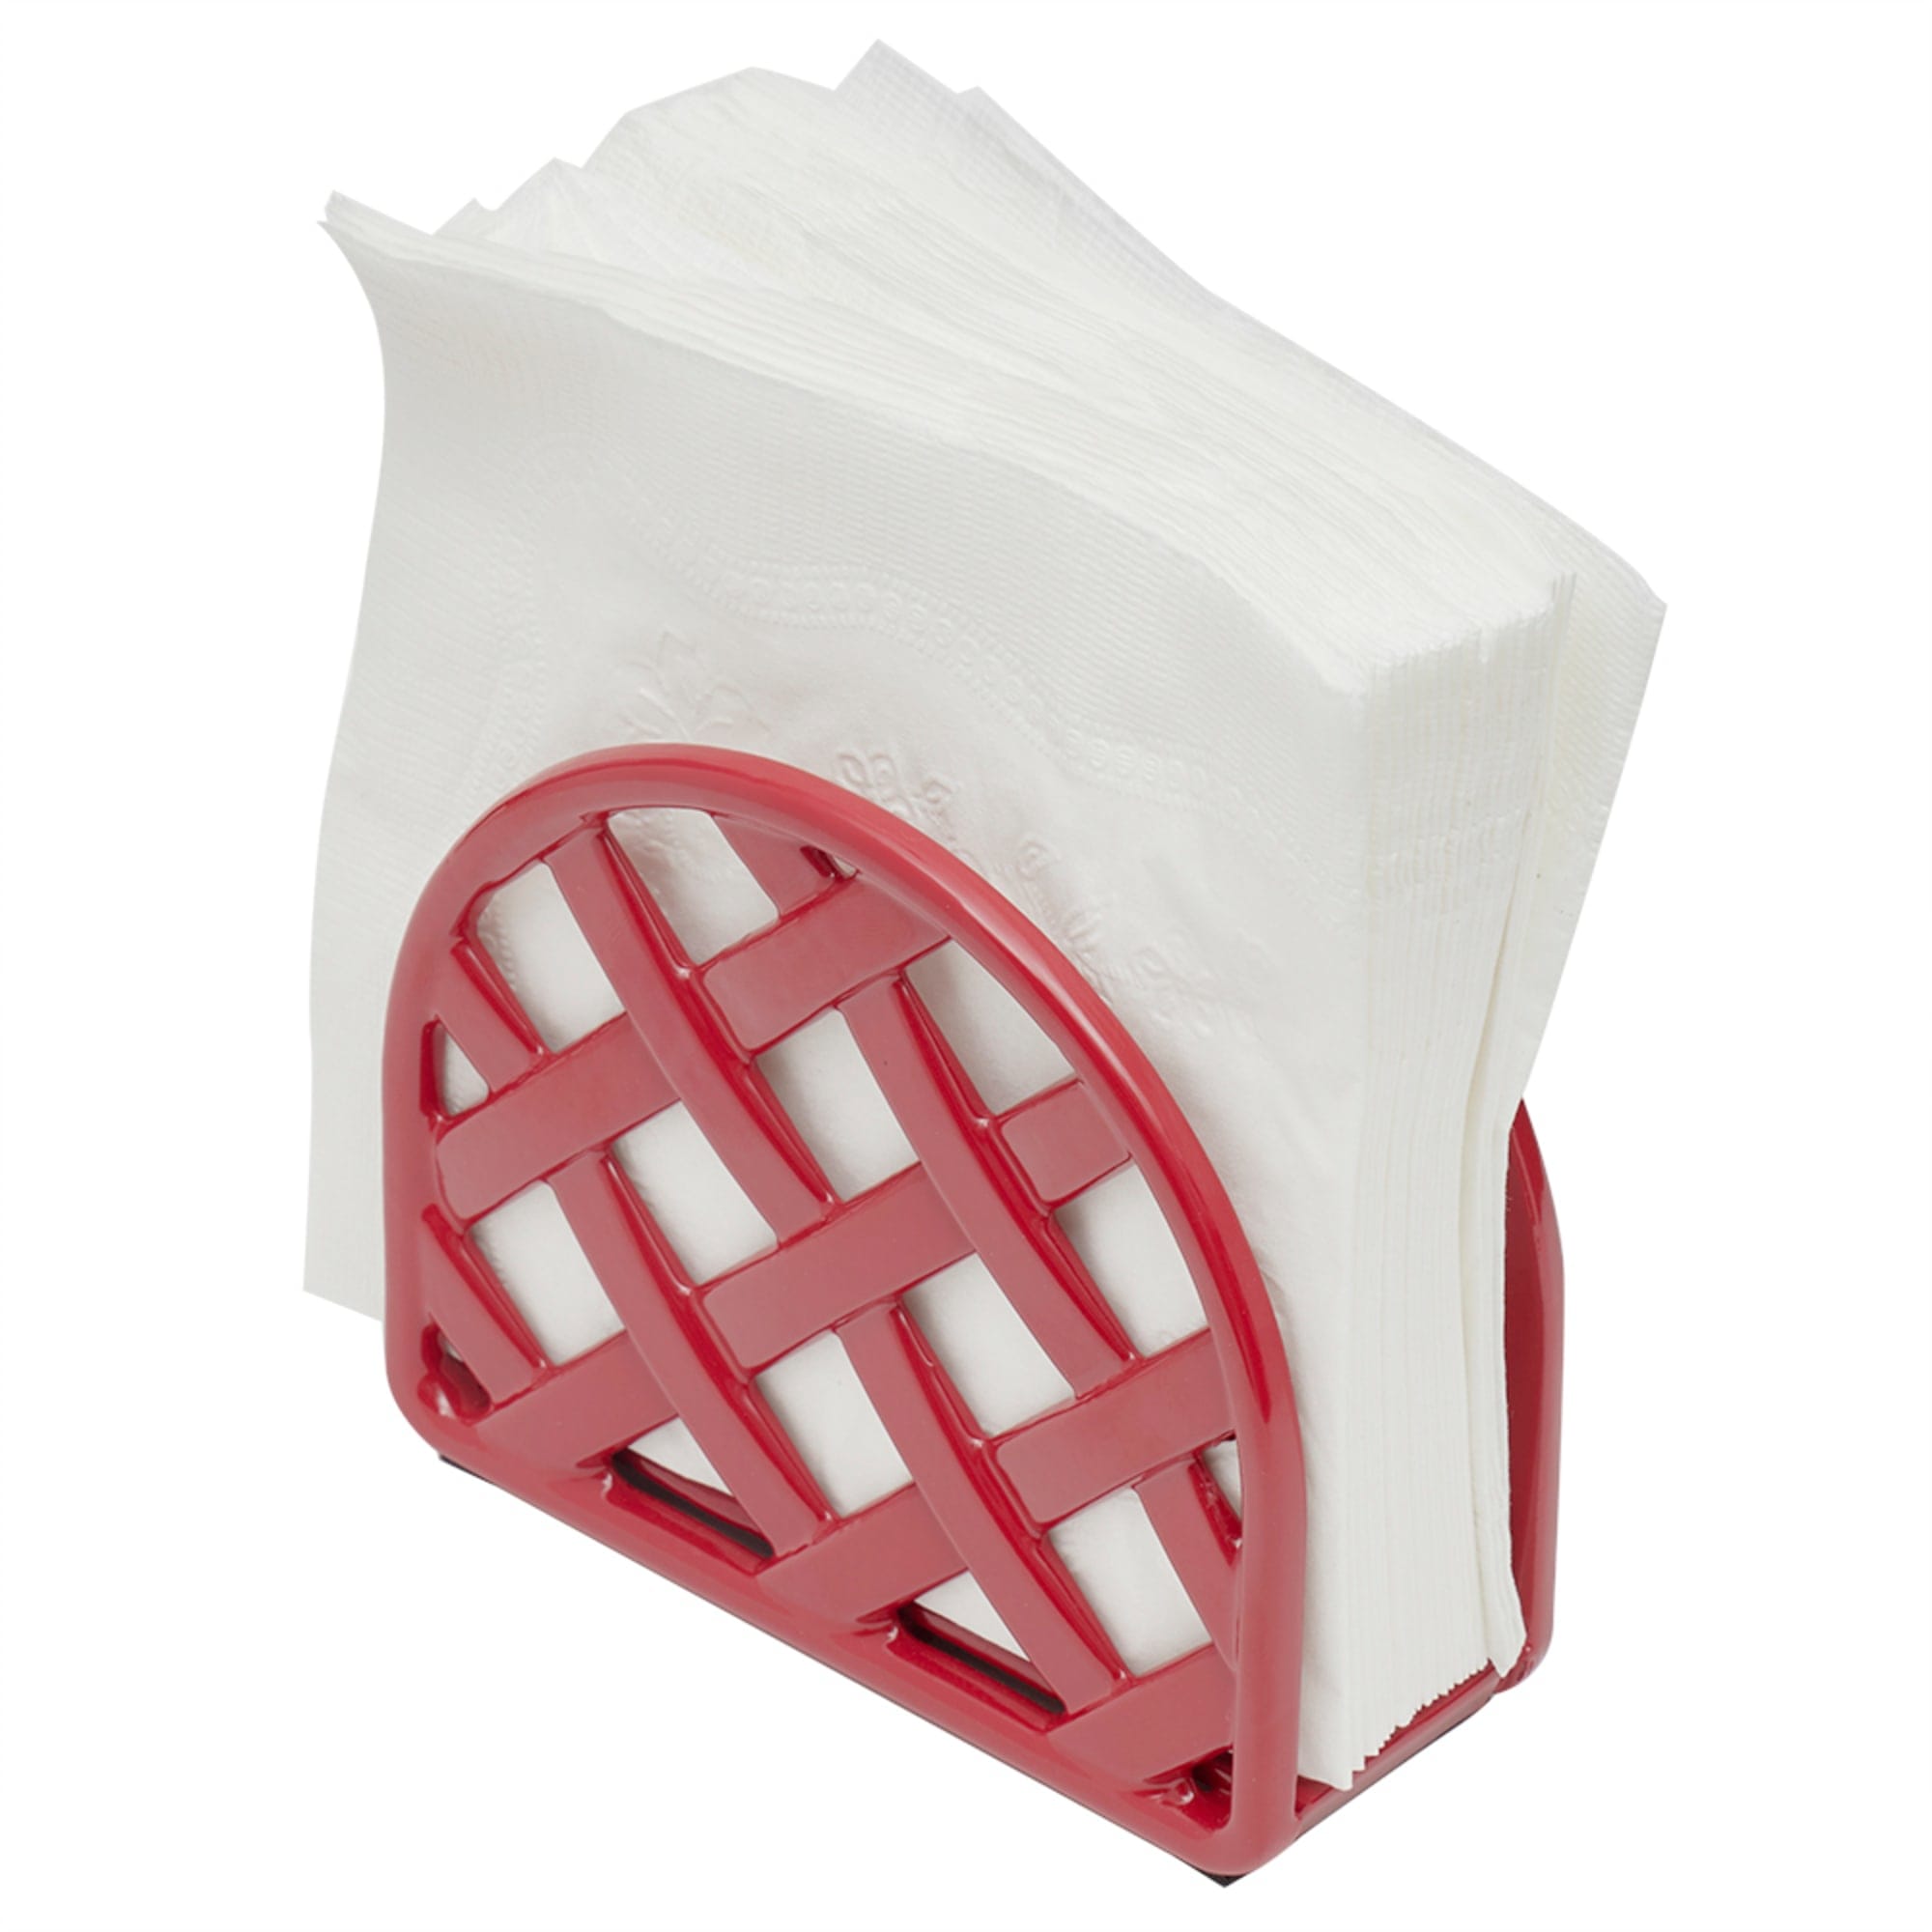 Home Basics Weave Upright Cast Iron Napkin Holder, Red $8.00 EACH, CASE PACK OF 6